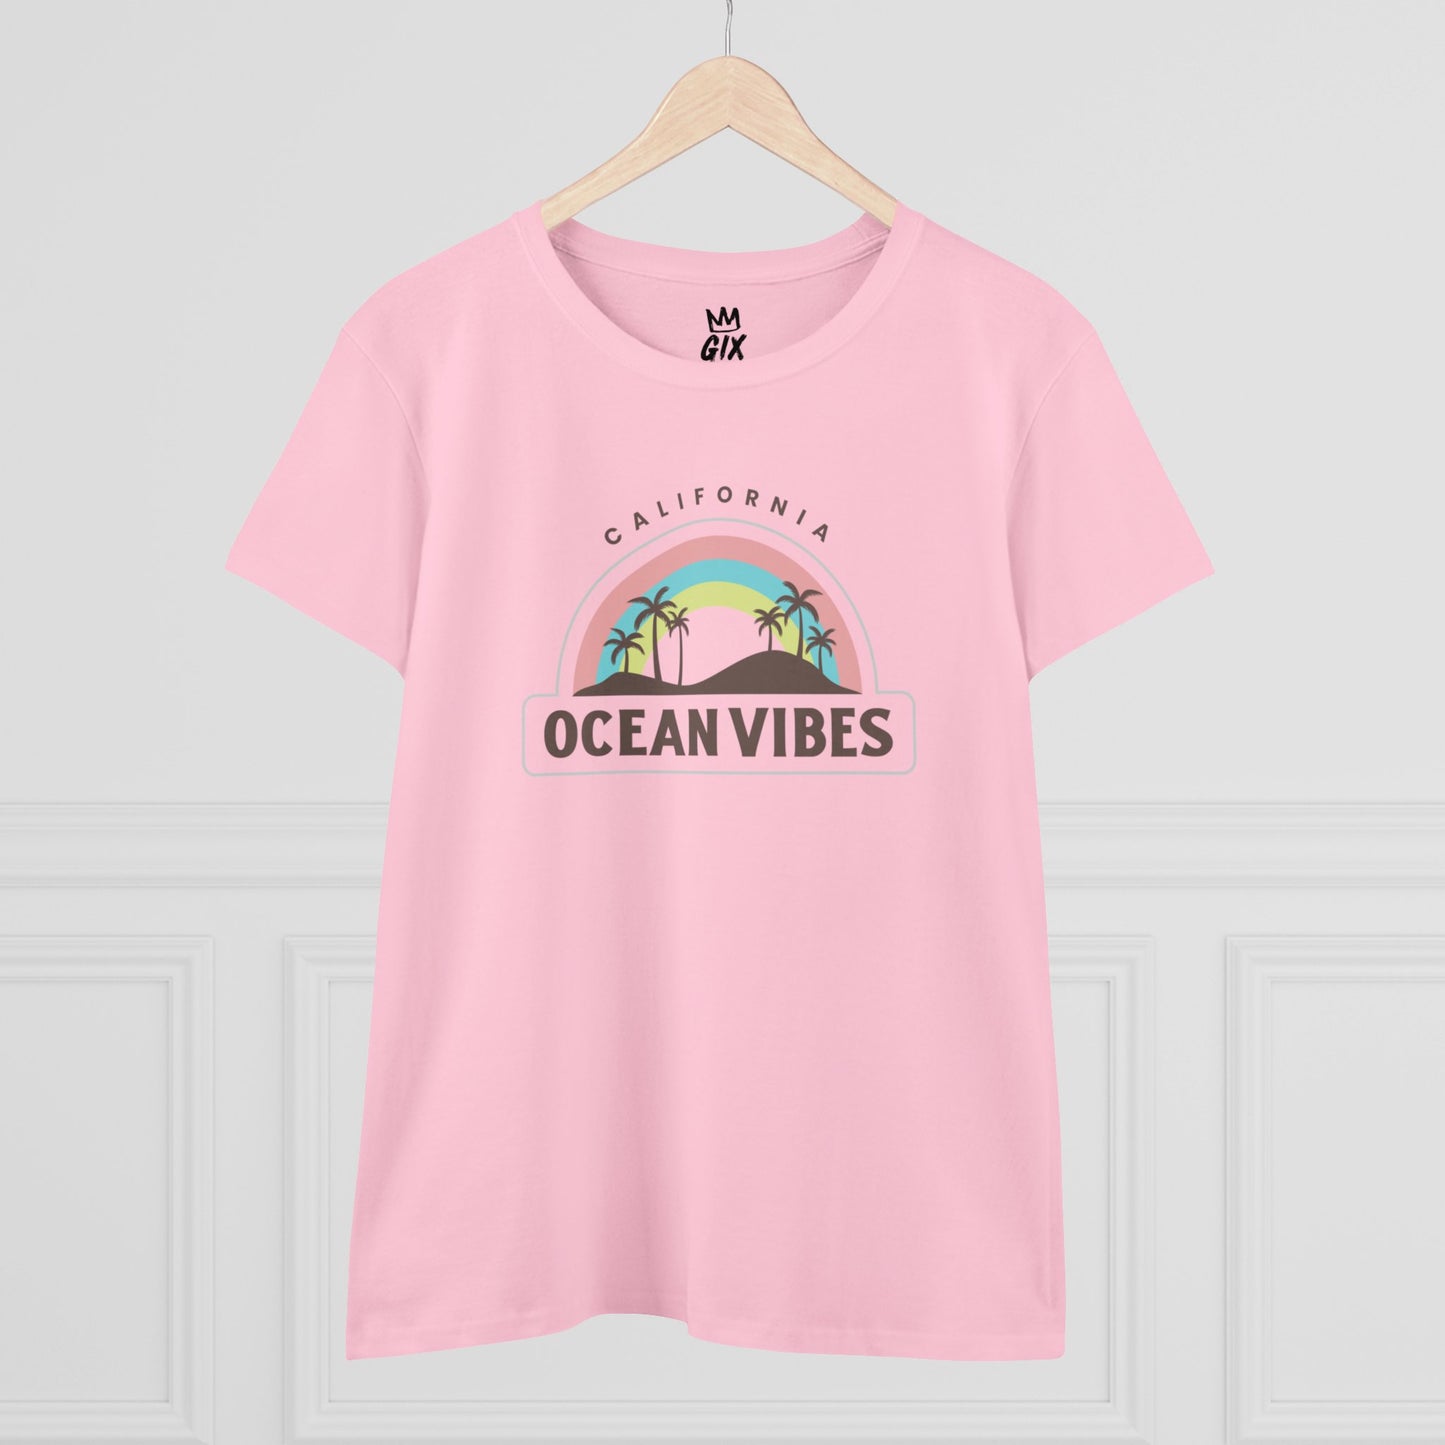 Ocean Vibes Women's Beach T-Shirt - 100% Cotton, Semi-Fitted, Soft and Comfy